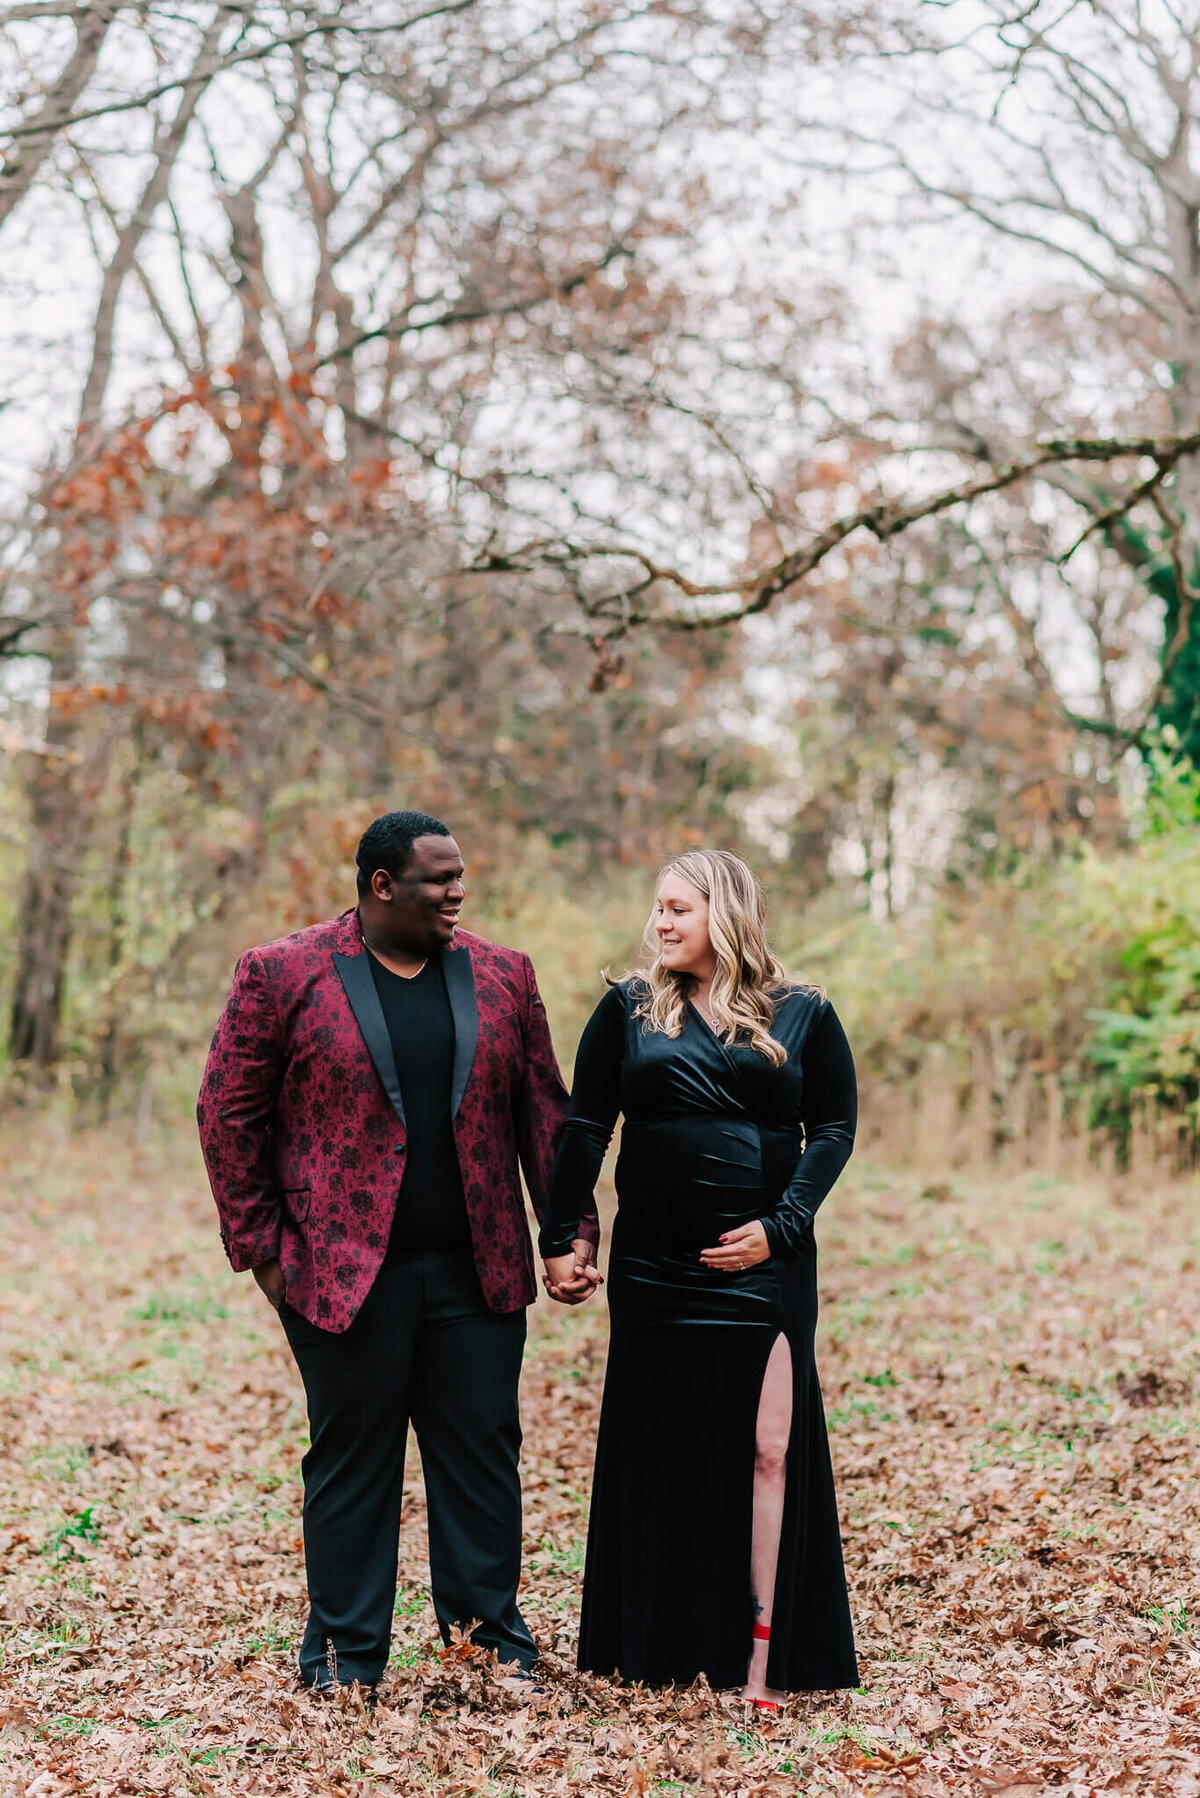 A man in burgundy holding hands with a pregnant woman in black velvet